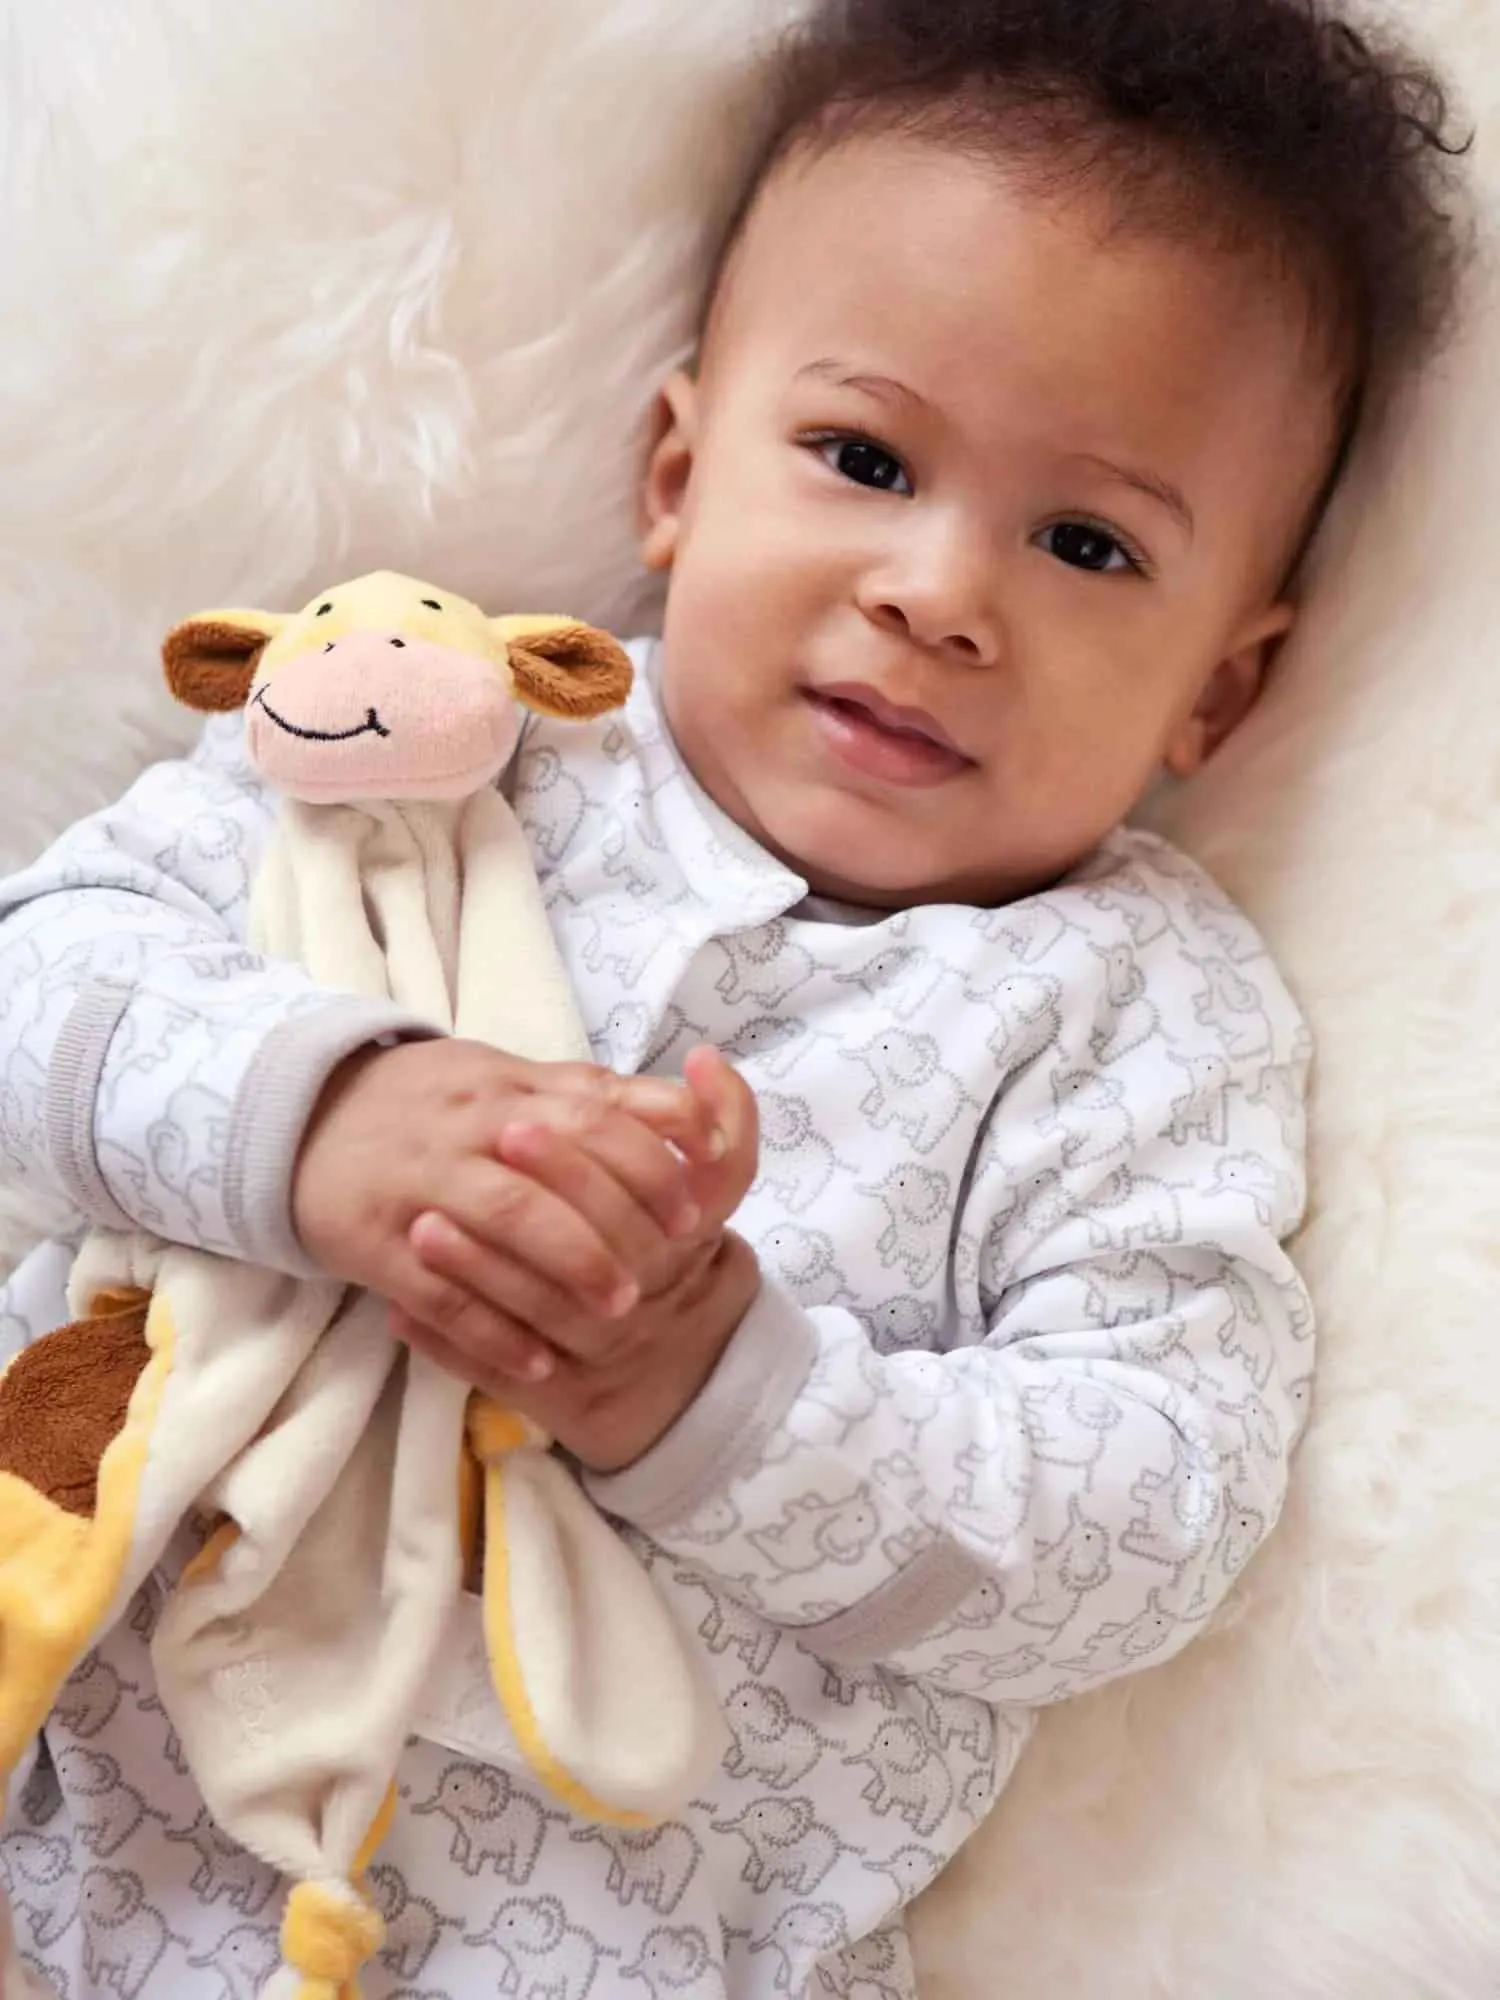 Baby holding extra soft and cuddly giraffe comforter.